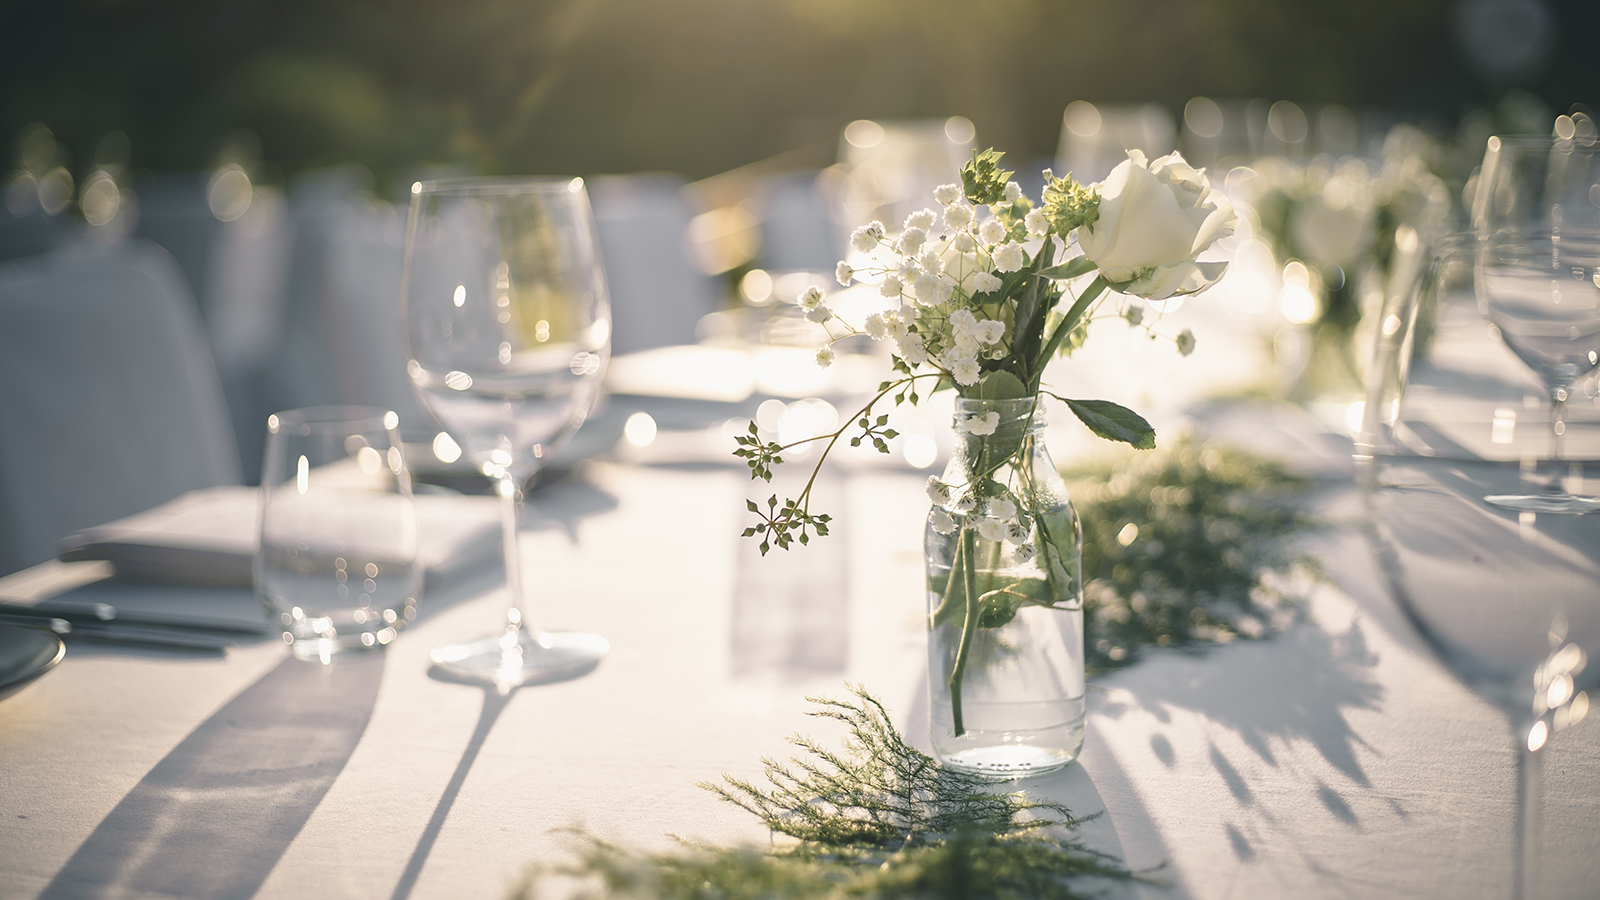 Beautiful outdoor table setting with white flowers for a dinner, wedding reception or other festive event.